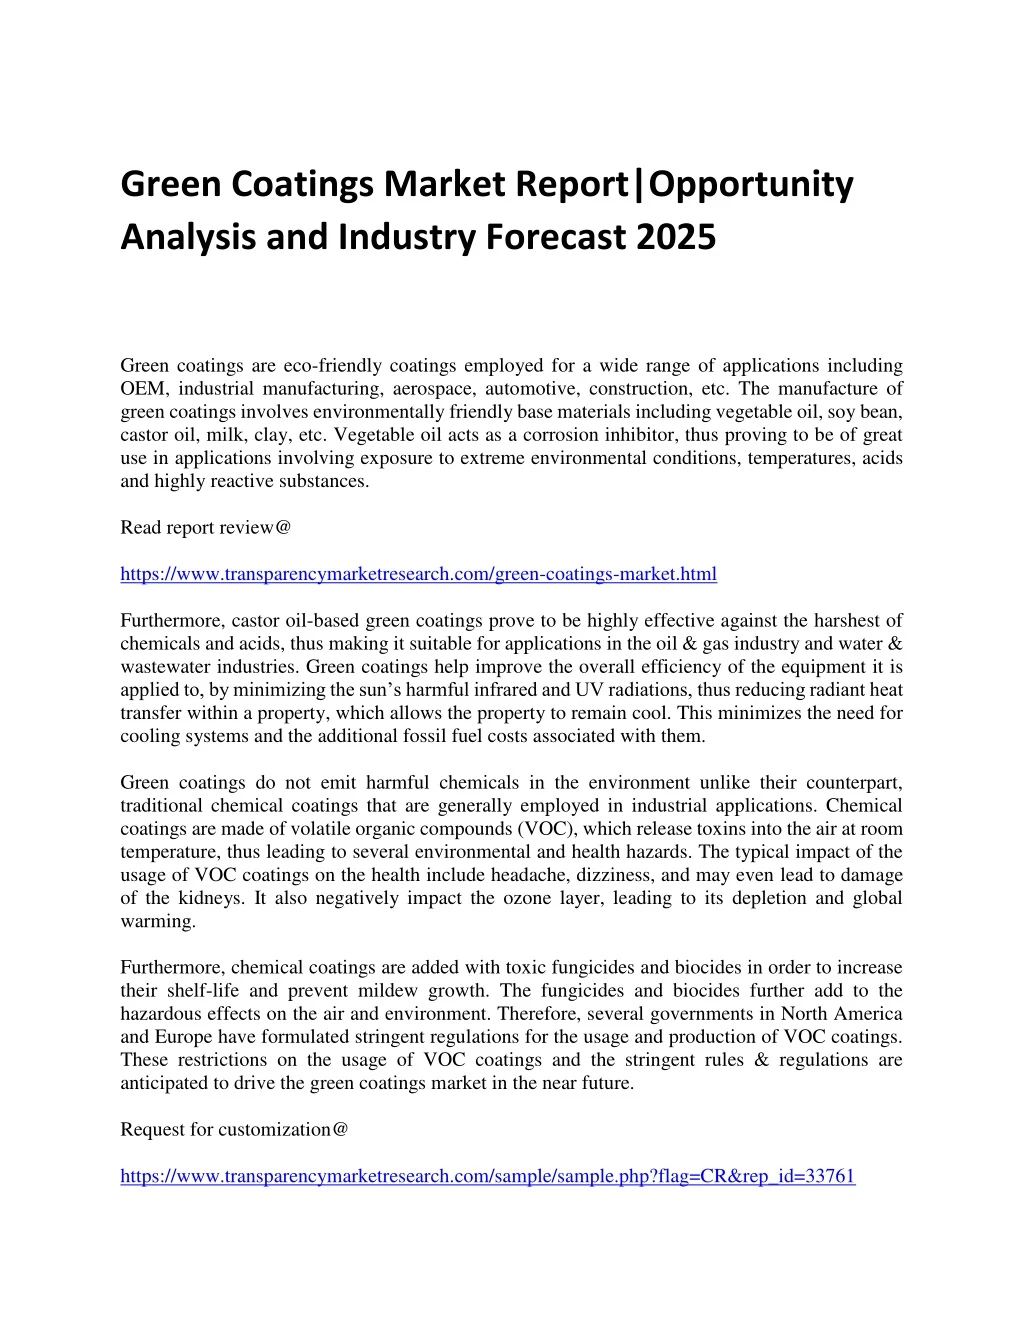 green coatings market report opportunity analysis